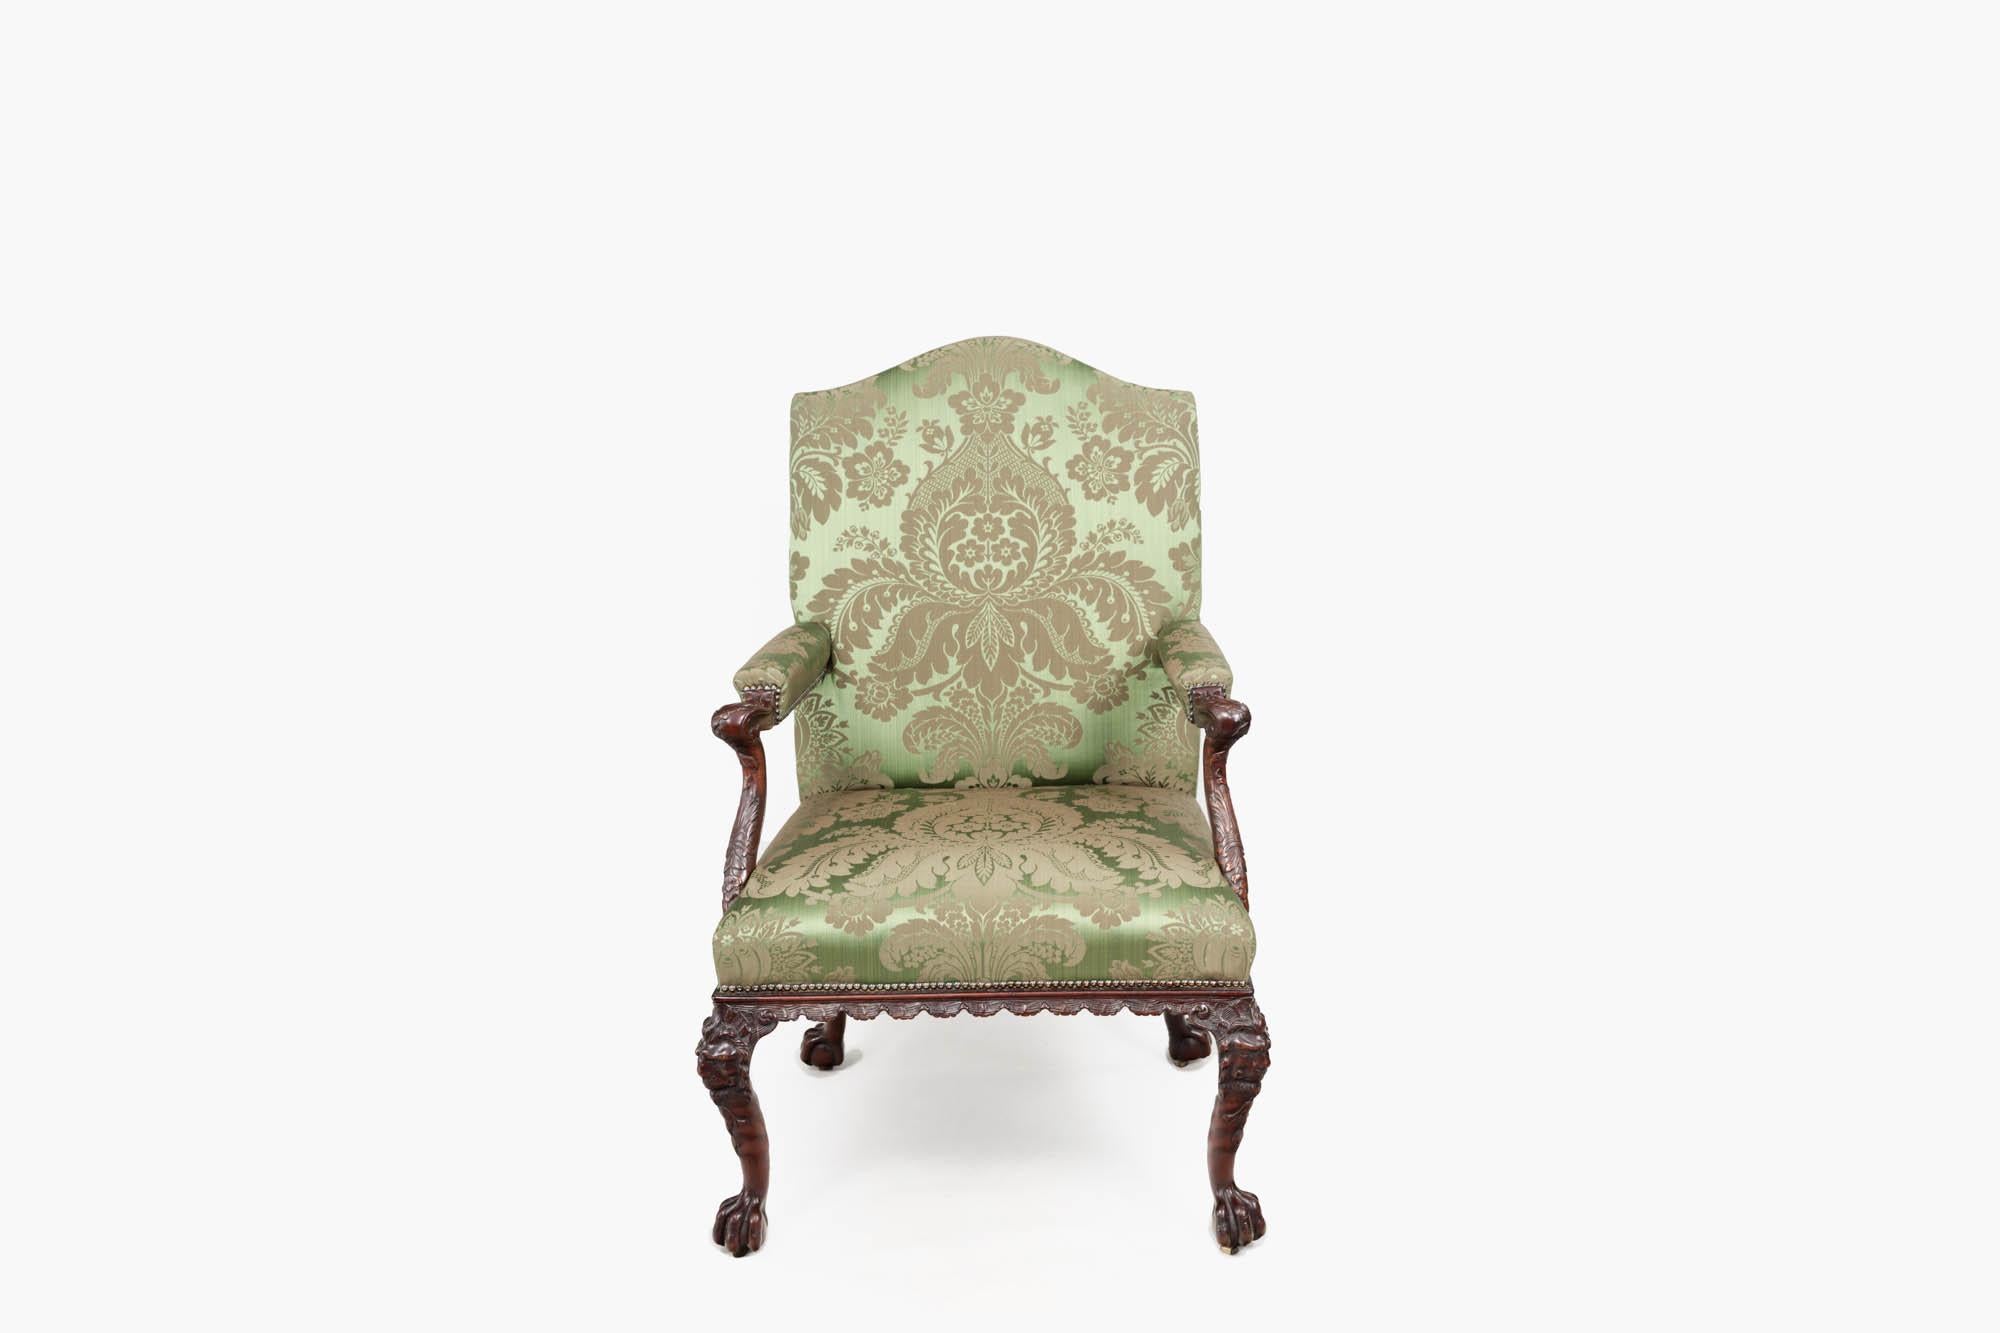 18th Century George III carved mahogany Gainsborough armchair with a gently curved upholstered back and carved, shaped arms, complete with scrolled handles and leaf-carved moldings to the supports and apron. The square seat is raised on four